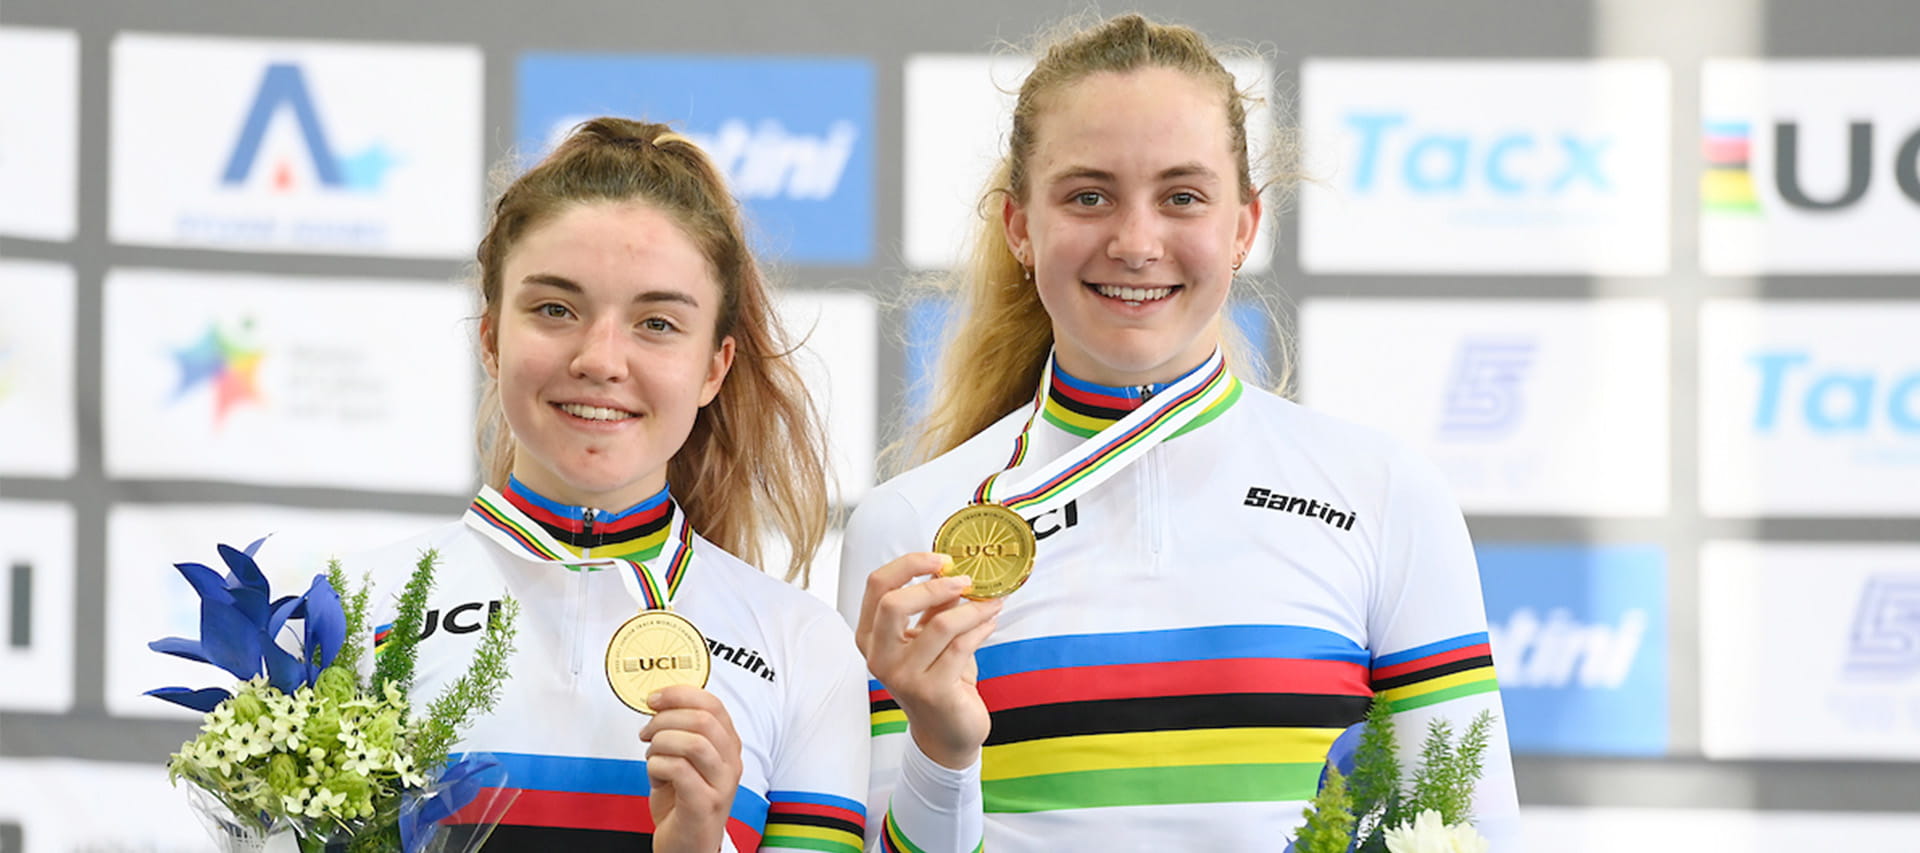 Grace Lister and Zoe Backstedt holding up their medals after their Madison win at the world championships